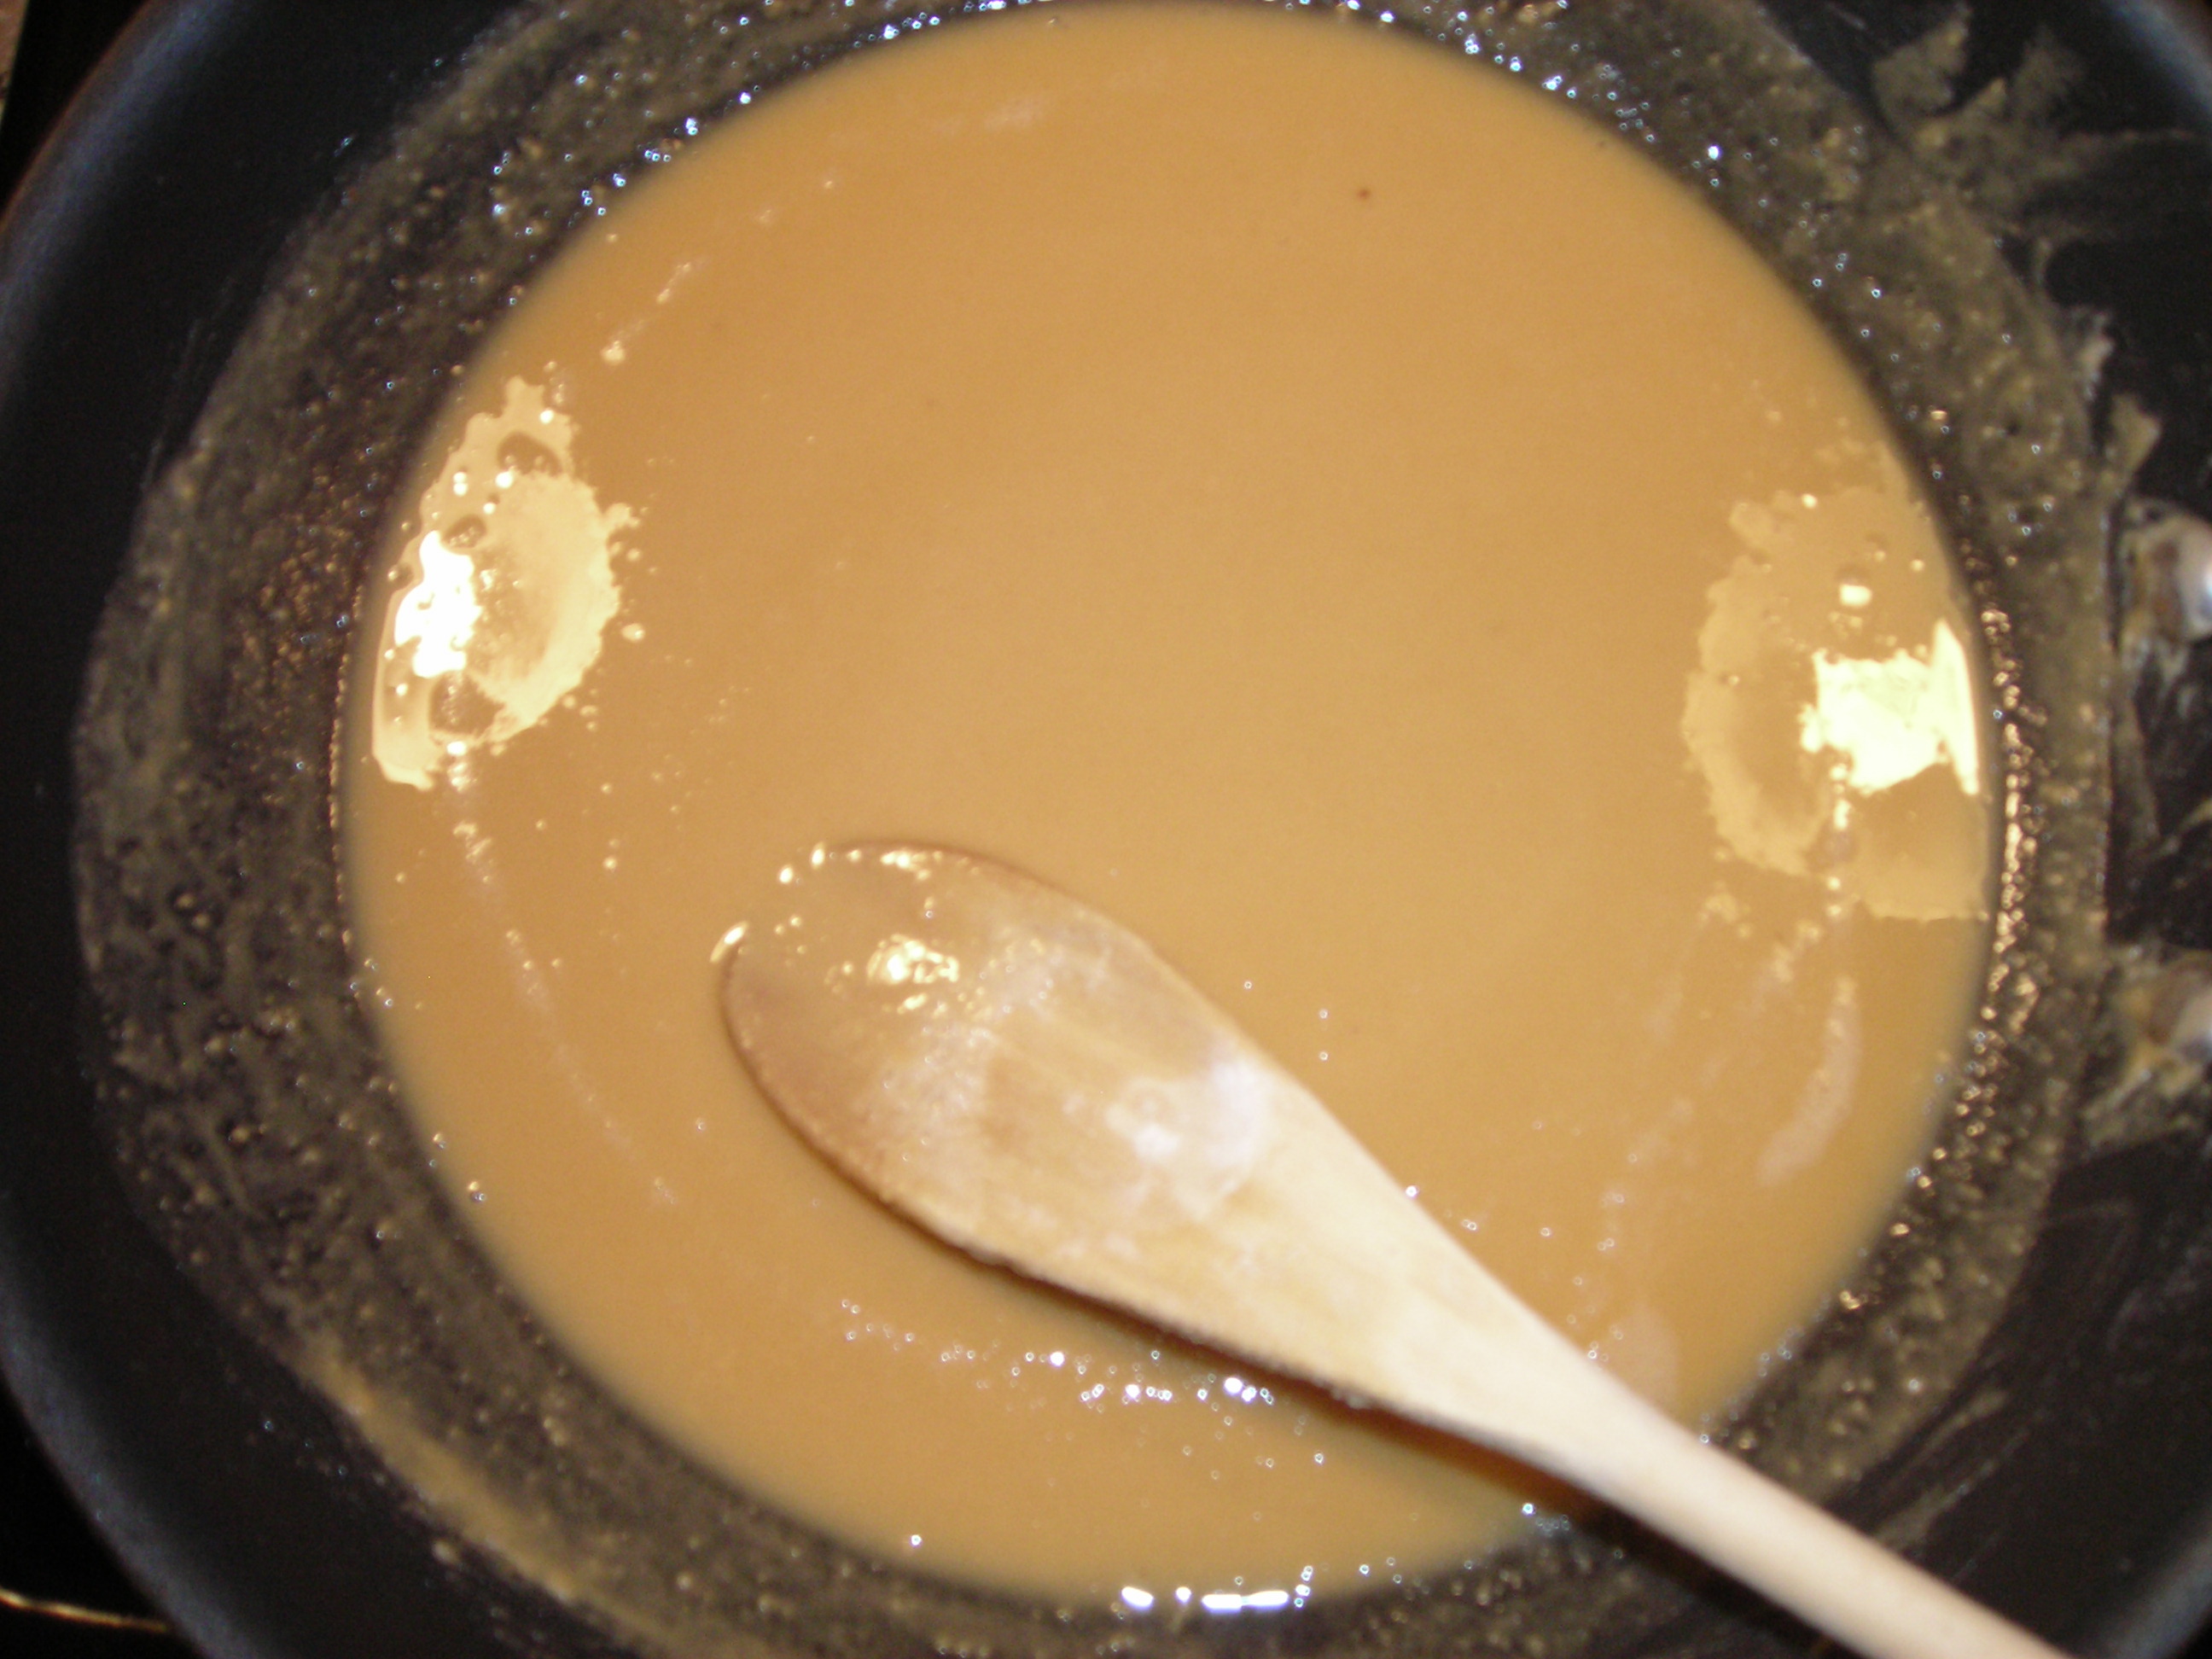 Roux is a rich brown and smells like baked piecrust